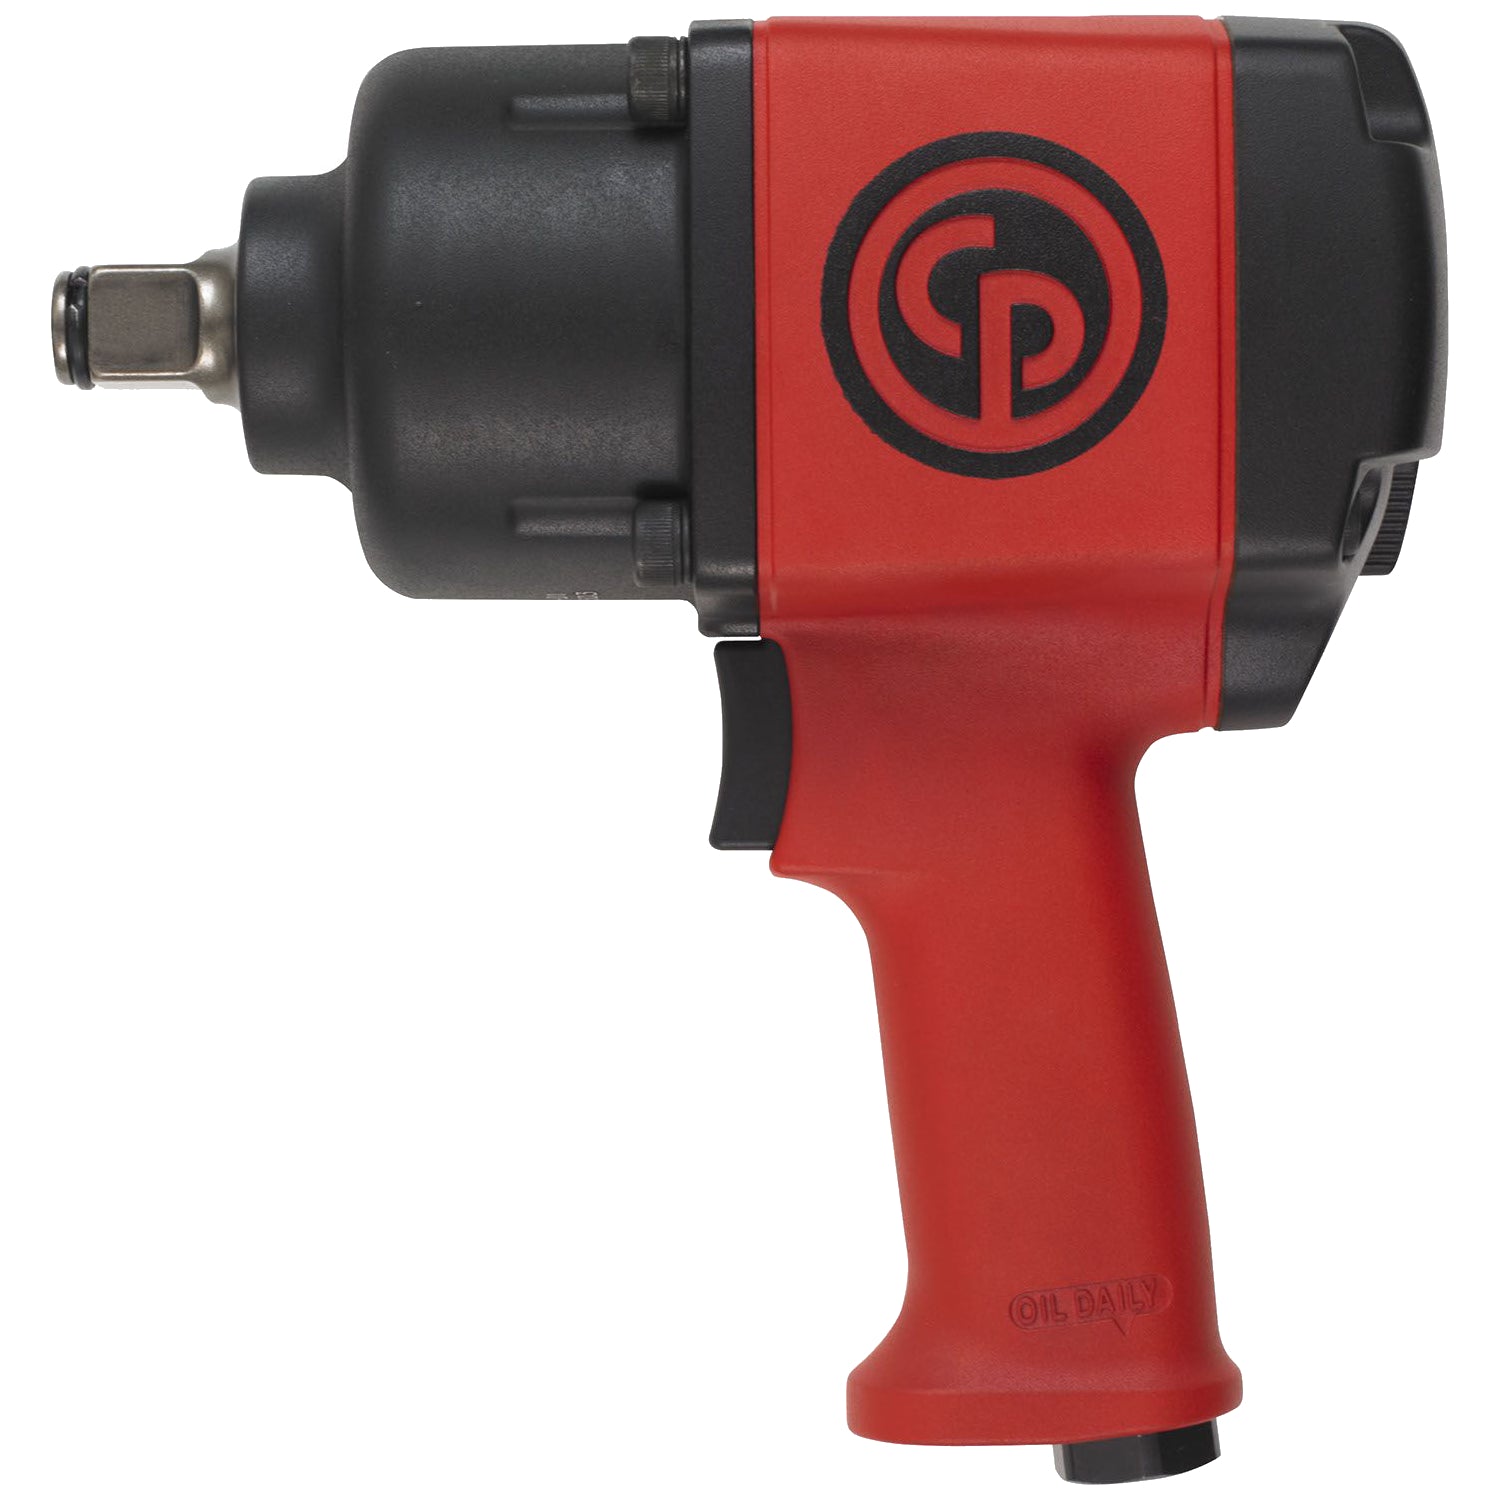 Chicago Pneumatic CP7763 3/4" Short Shank 1200 Ft/Lbs Impact Wrench